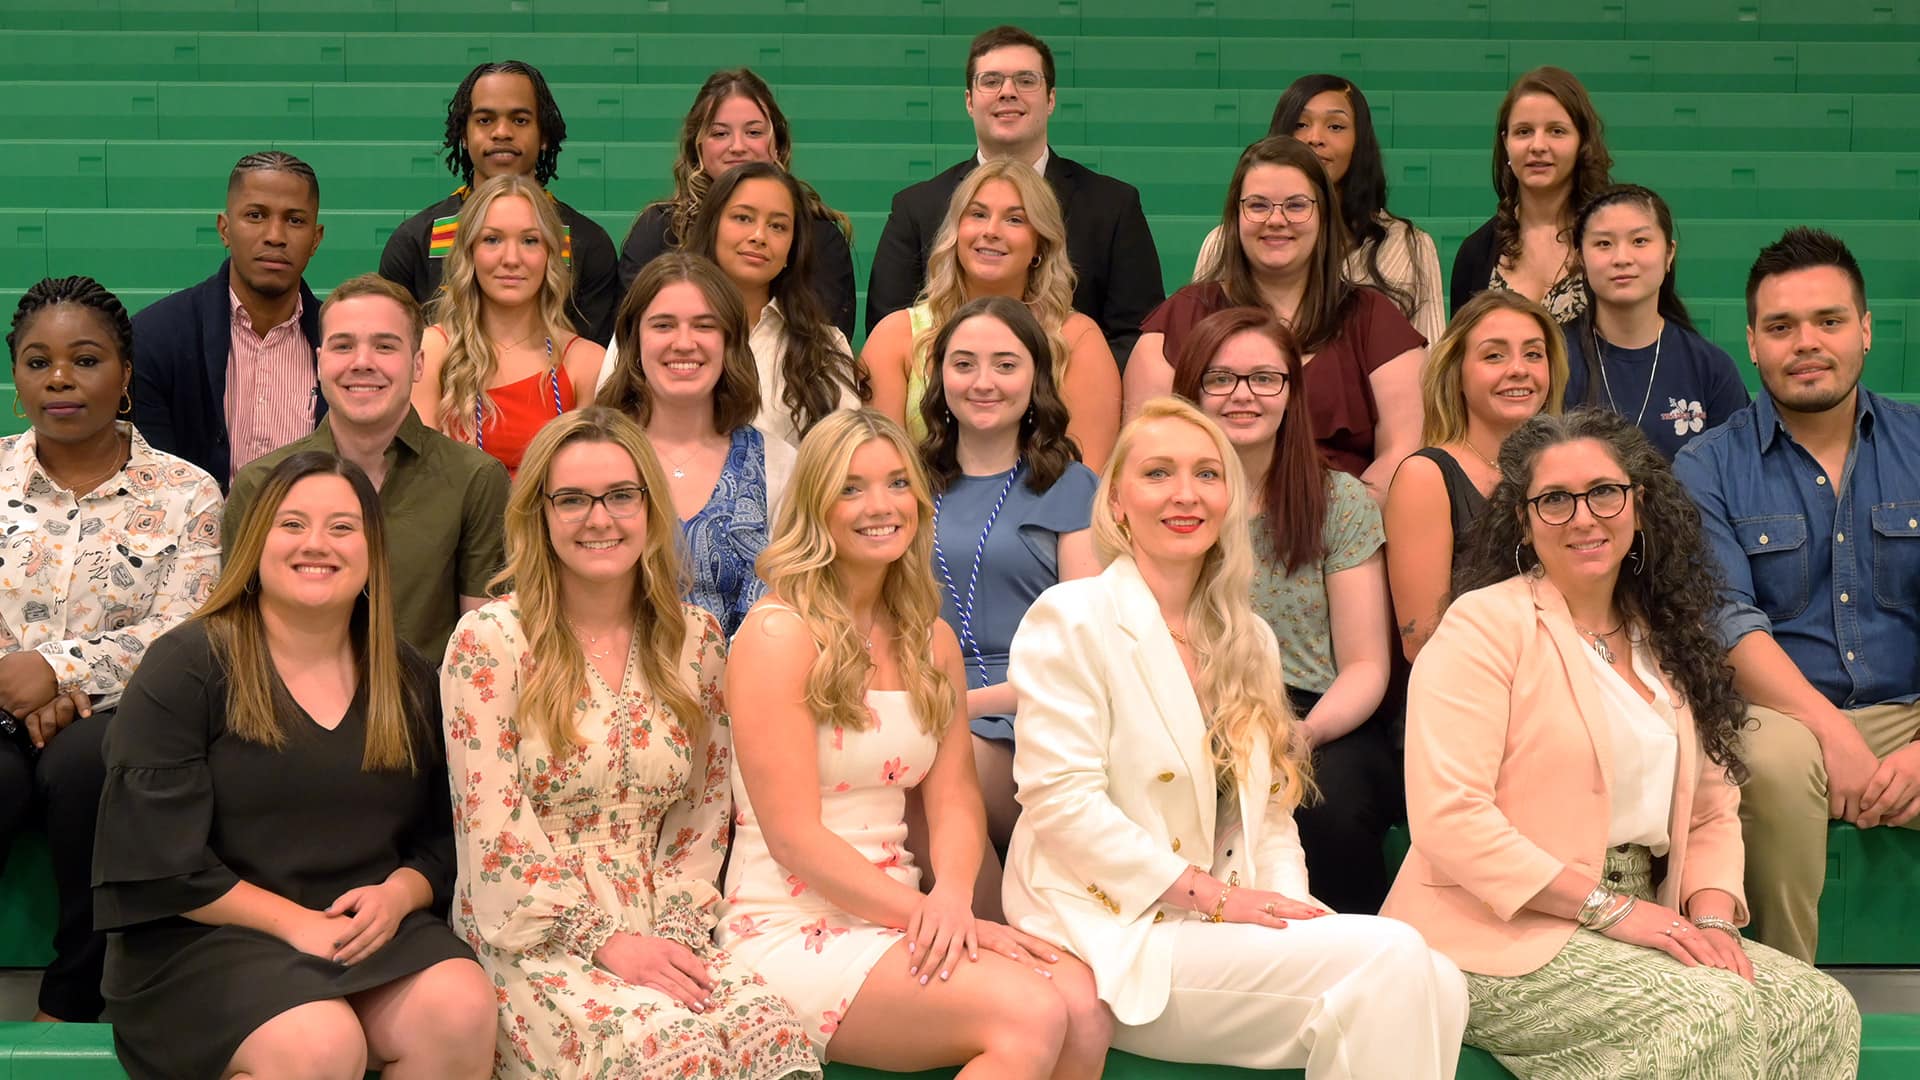 a group of nursing graduates attending the pinning ceremony poses together, sitting on bleachers